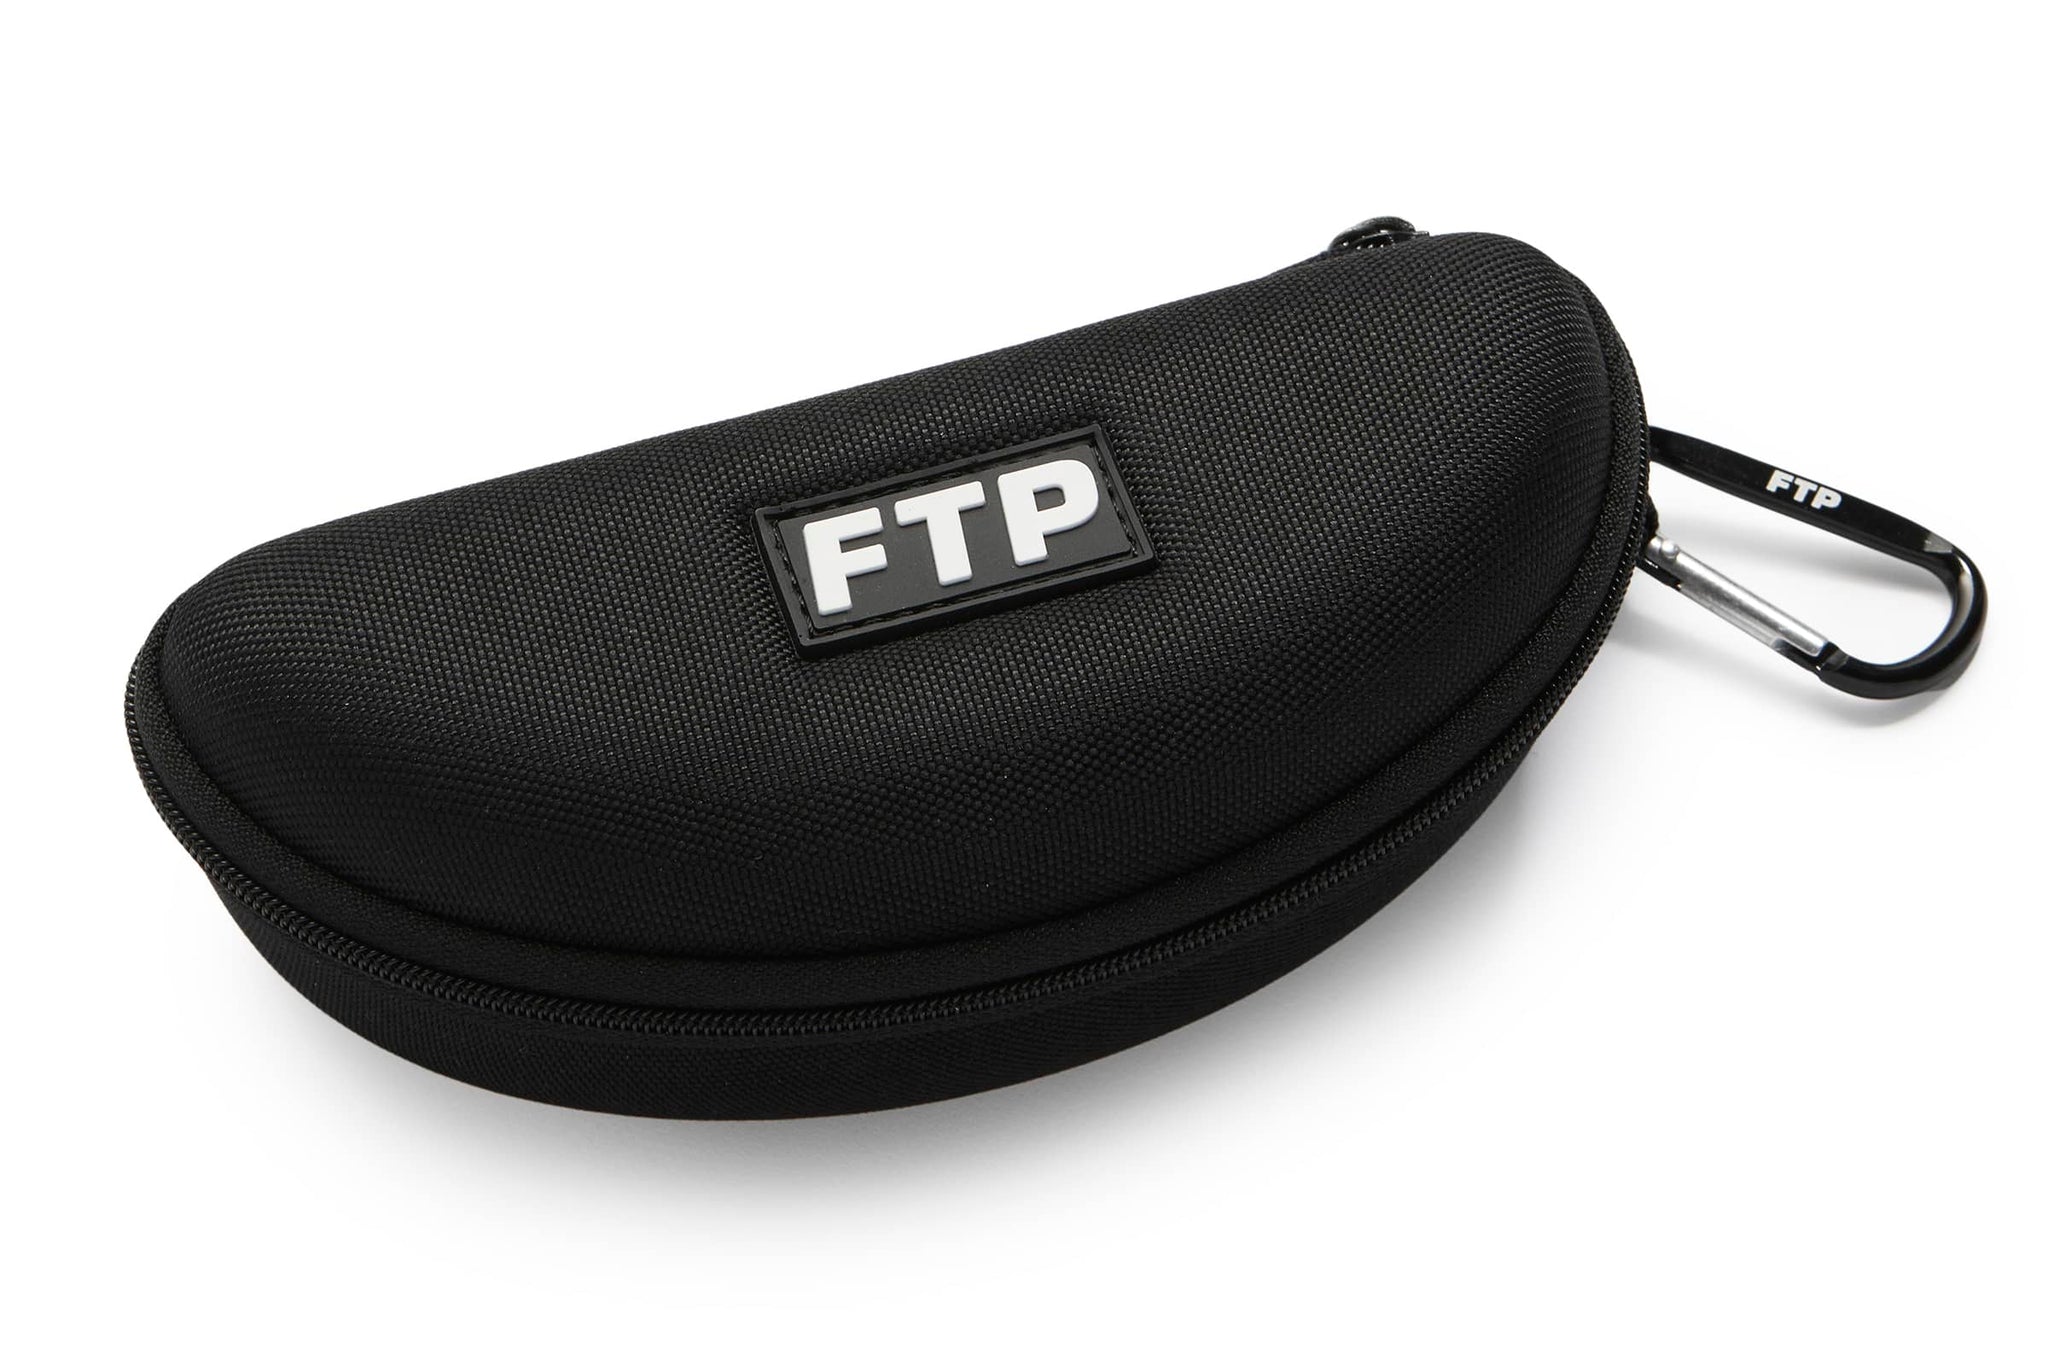 The FTP Sport - Silver